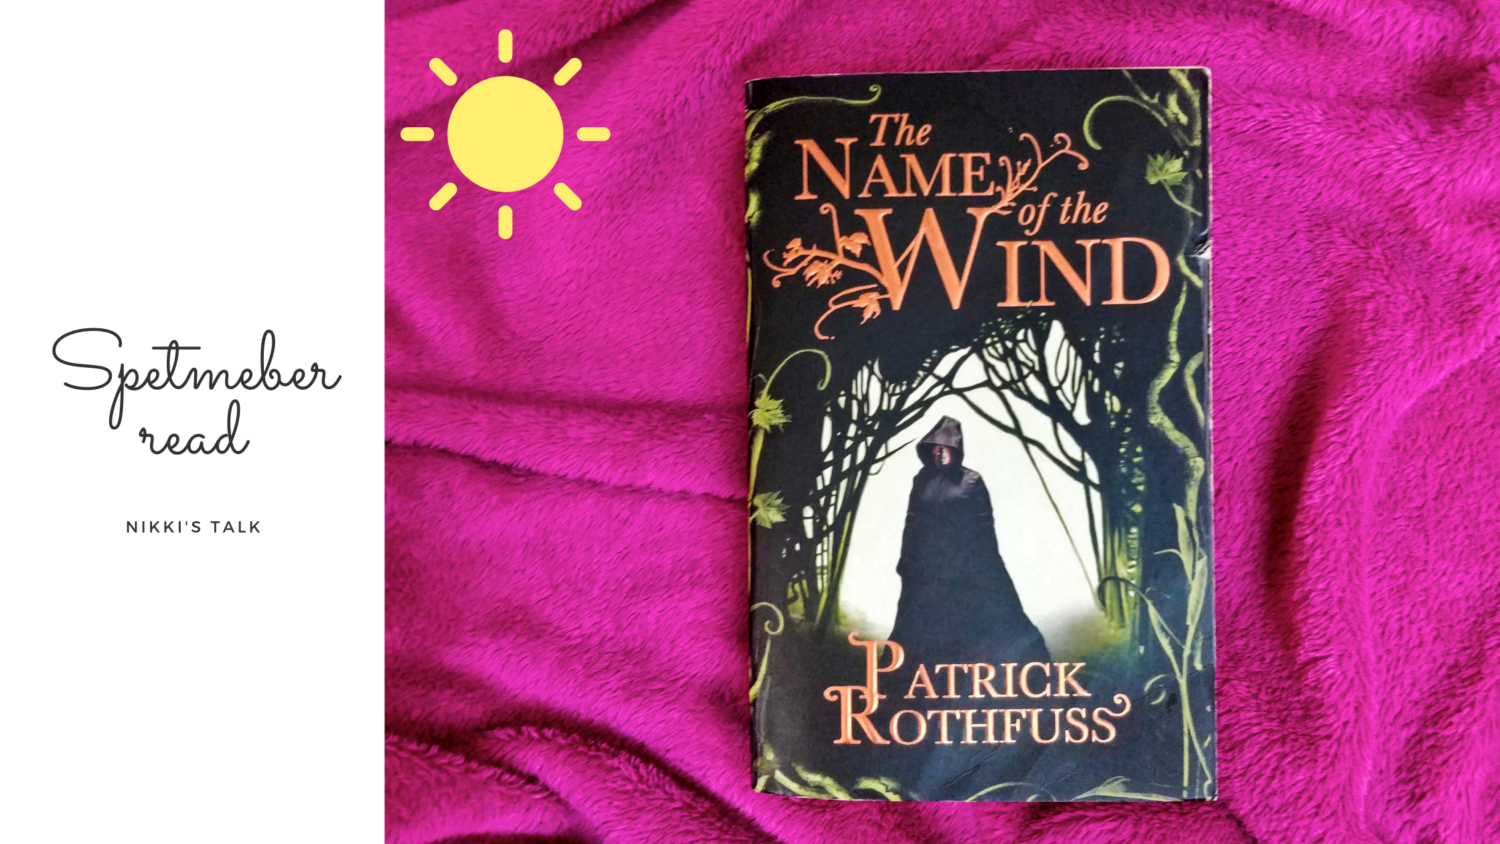 the name of the wind | Patrick rothfuss